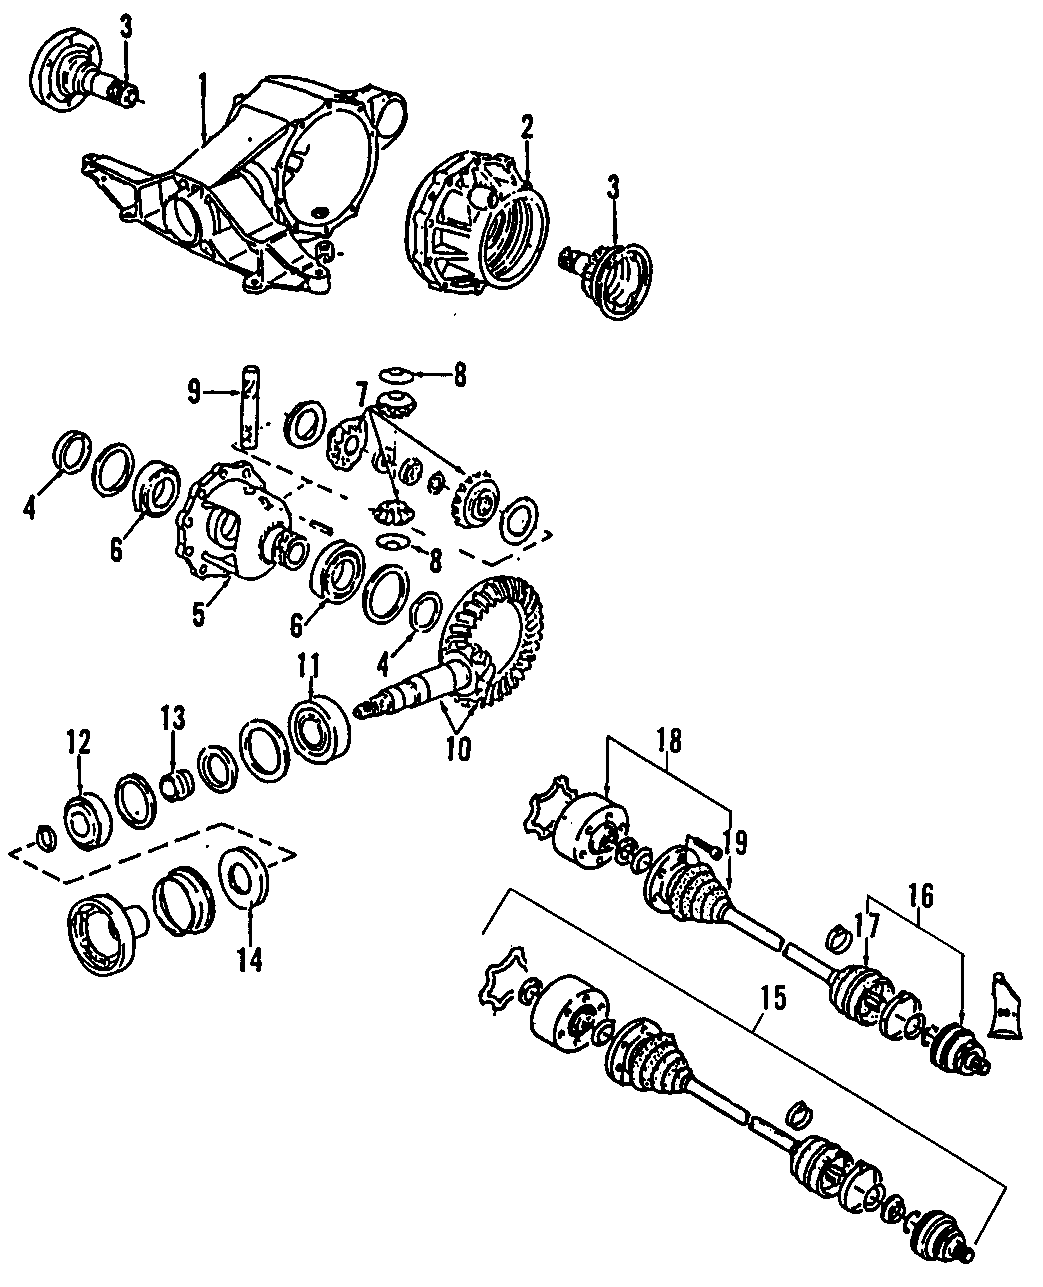 5DRIVE AXLES. REAR AXLE. AXLE SHAFTS & JOINTS. DIFFERENTIAL. PROPELLER SHAFT.https://images.simplepart.com/images/parts/motor/fullsize/F207090.png